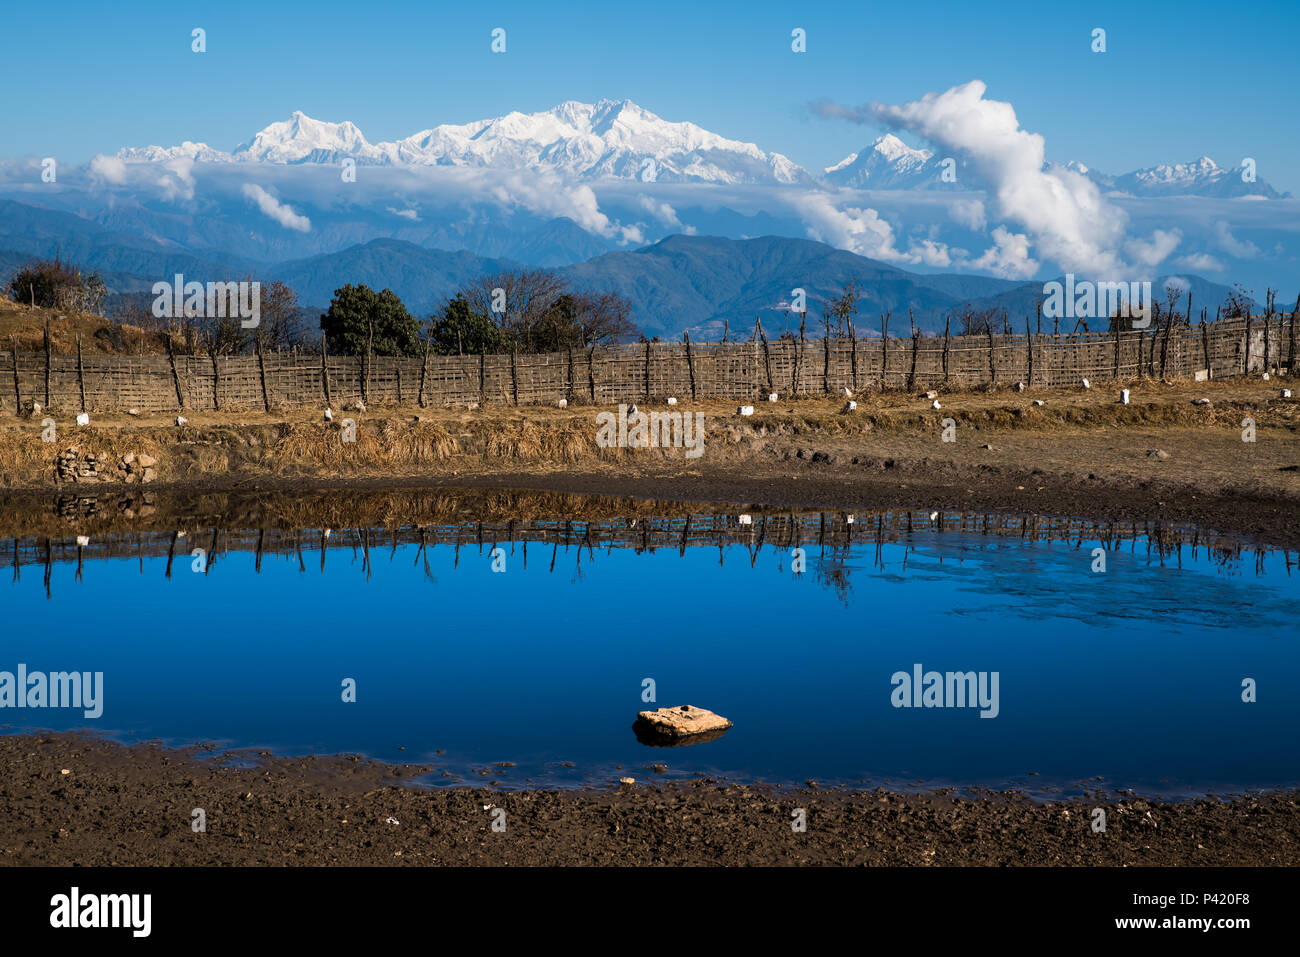 landscape of Tonglu trekkers hut and Kangchenjunga mount during blue sky day time. This place is  middle way to Sandakphu, north of India Stock Photo